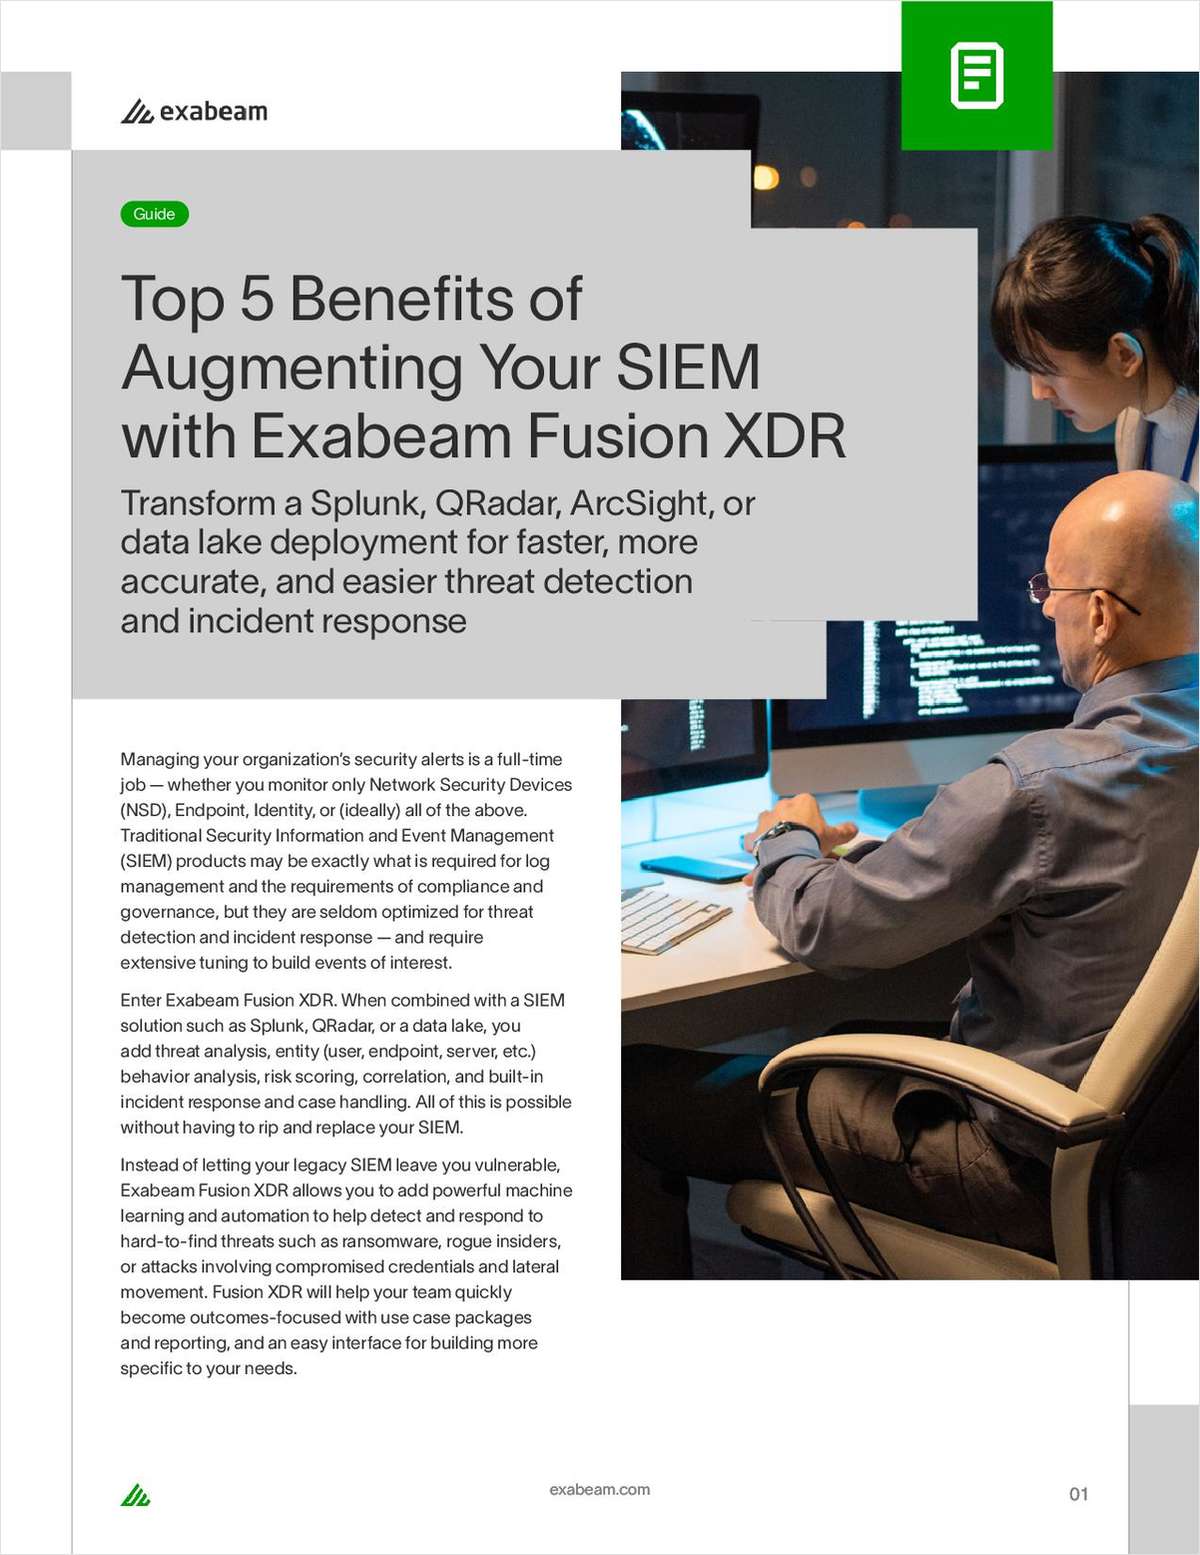 The Top 5 Benefits of Augmenting Your SIEM with Exabeam Fusion XDR